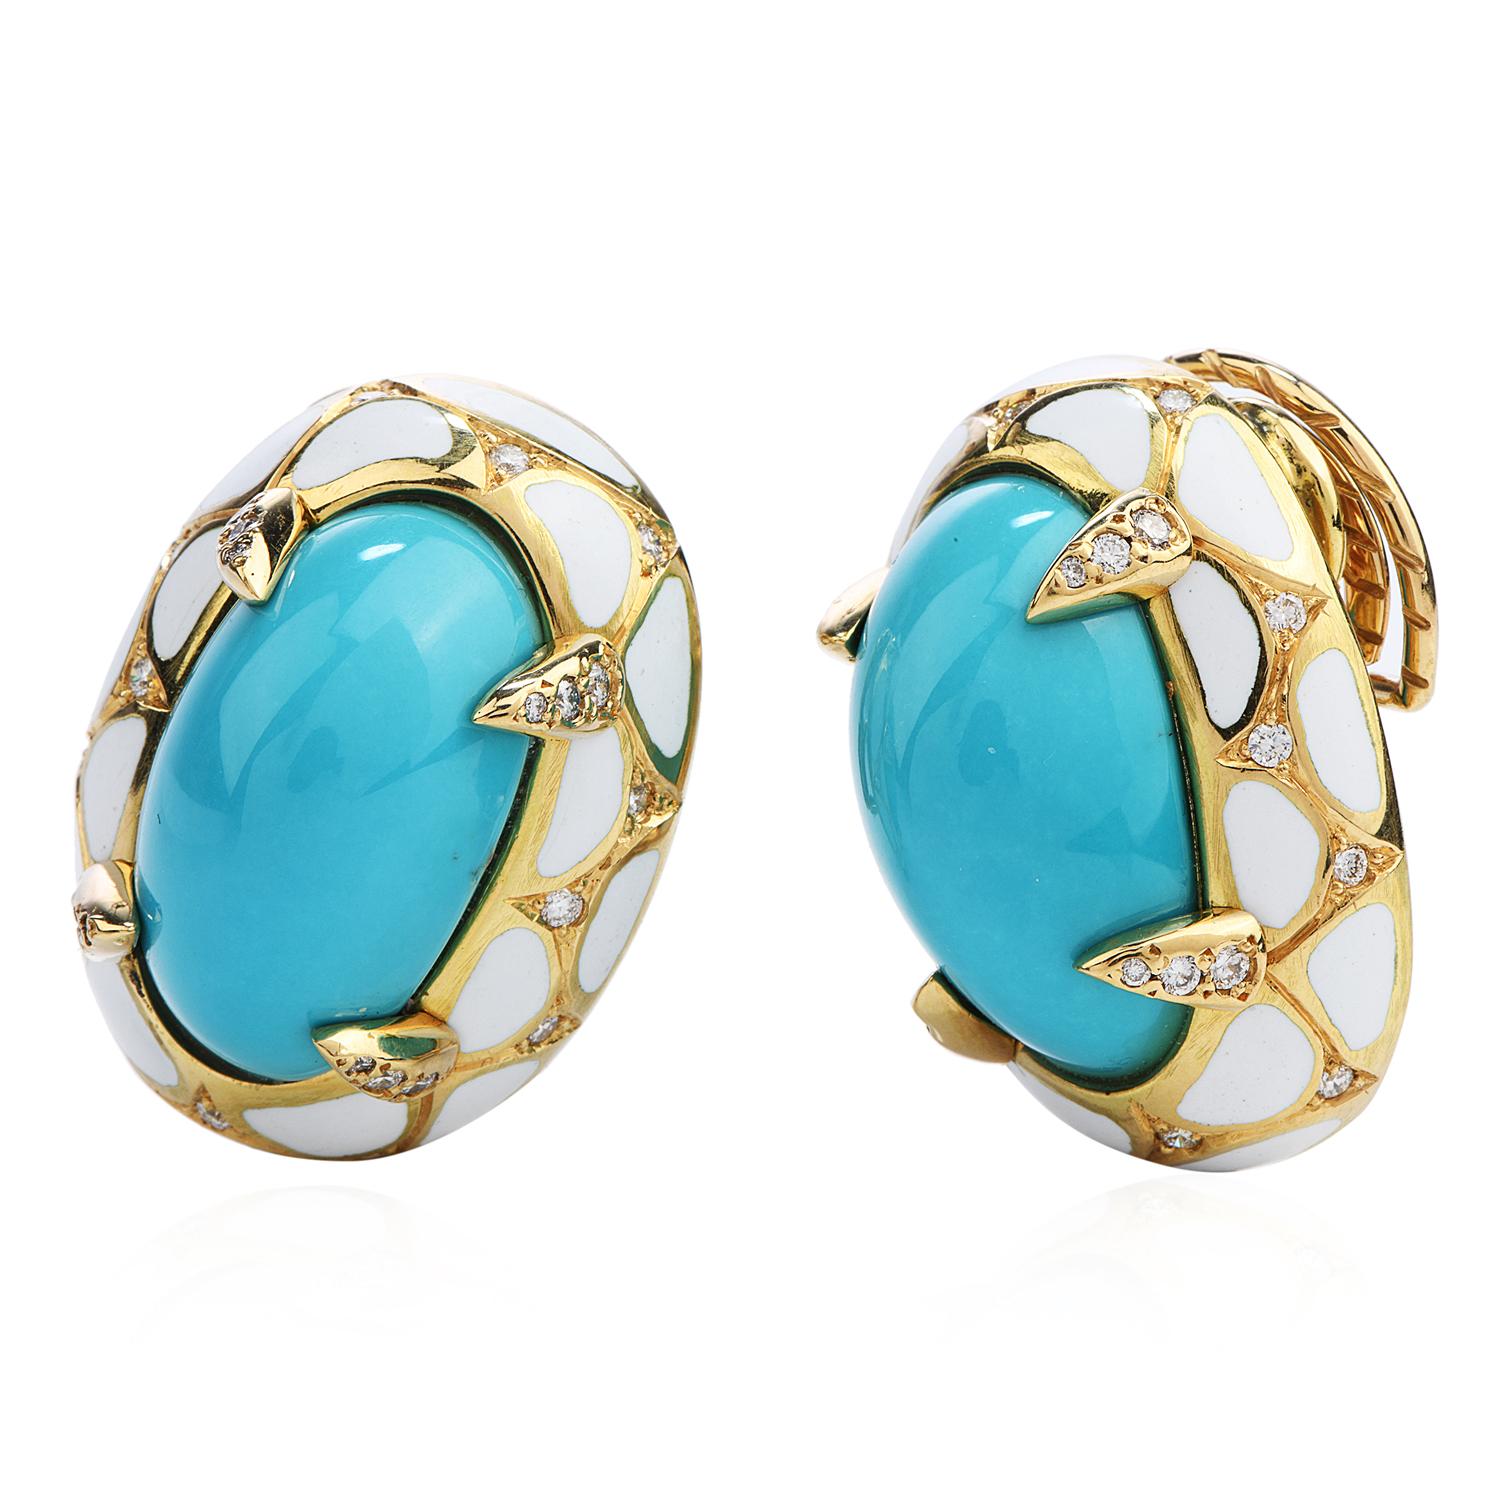 This Vintage  1970's Pair of Diamond and Turquoise Earrings were inspired in the Nest & Eggs Style,

crafted in solid 18K Yellow Gold with White Enamel Accents,

The focus and prominent center contains an oval 

cabochon-cut GIA Certified Turquoise